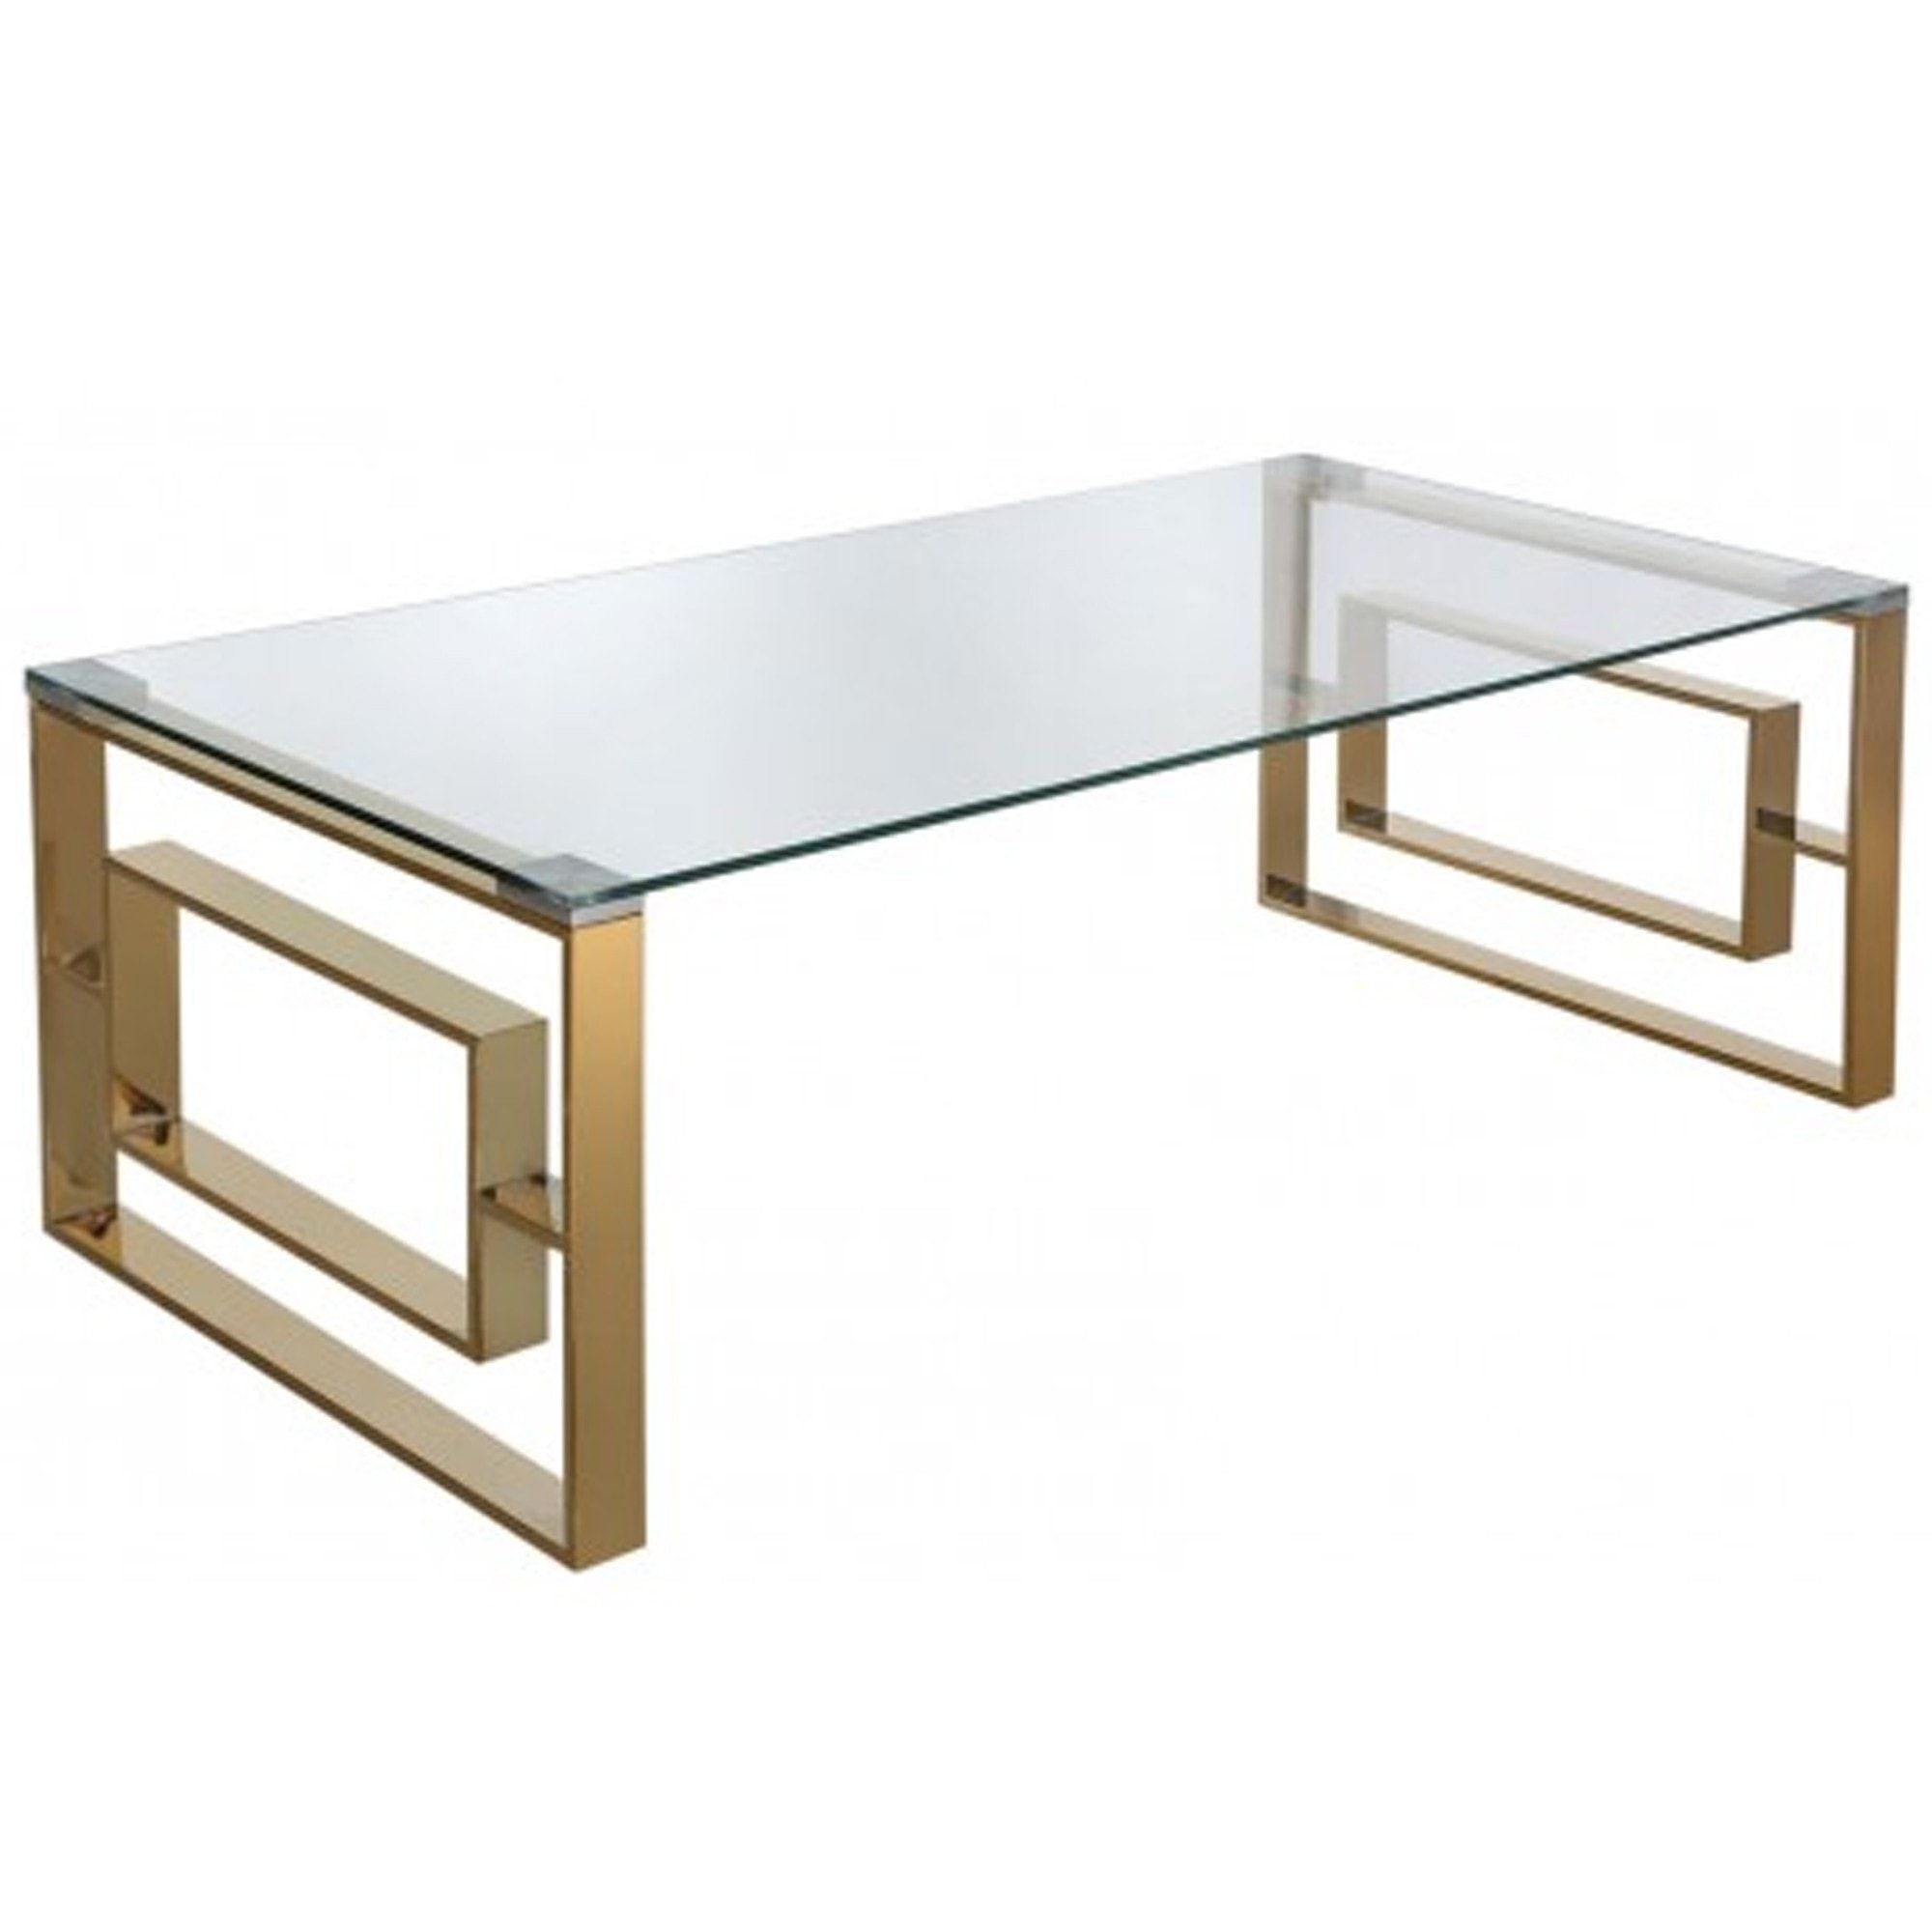 Apex Gold Metal Coffee Table | Gold Metal | Metal Coffee Table With Regard To Glossy Finished Metal Coffee Tables (View 10 of 20)